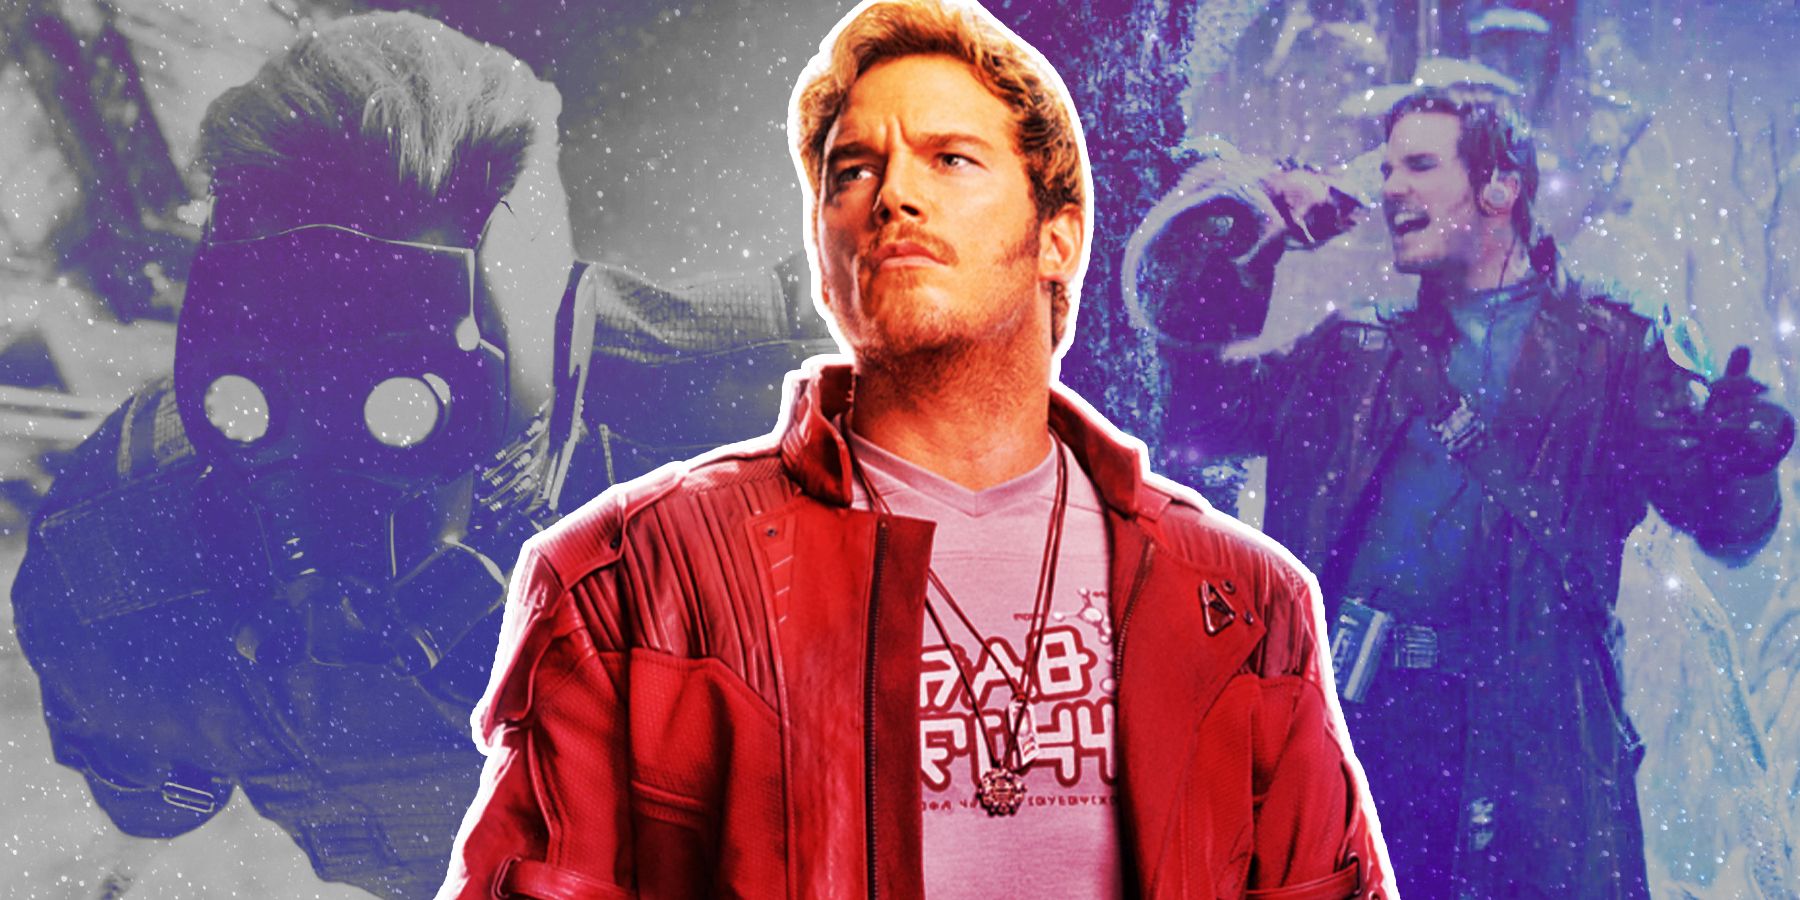 Peter Quill/ Star-Lord as seen in various moments of the Guardians of the Galaxy trilogy